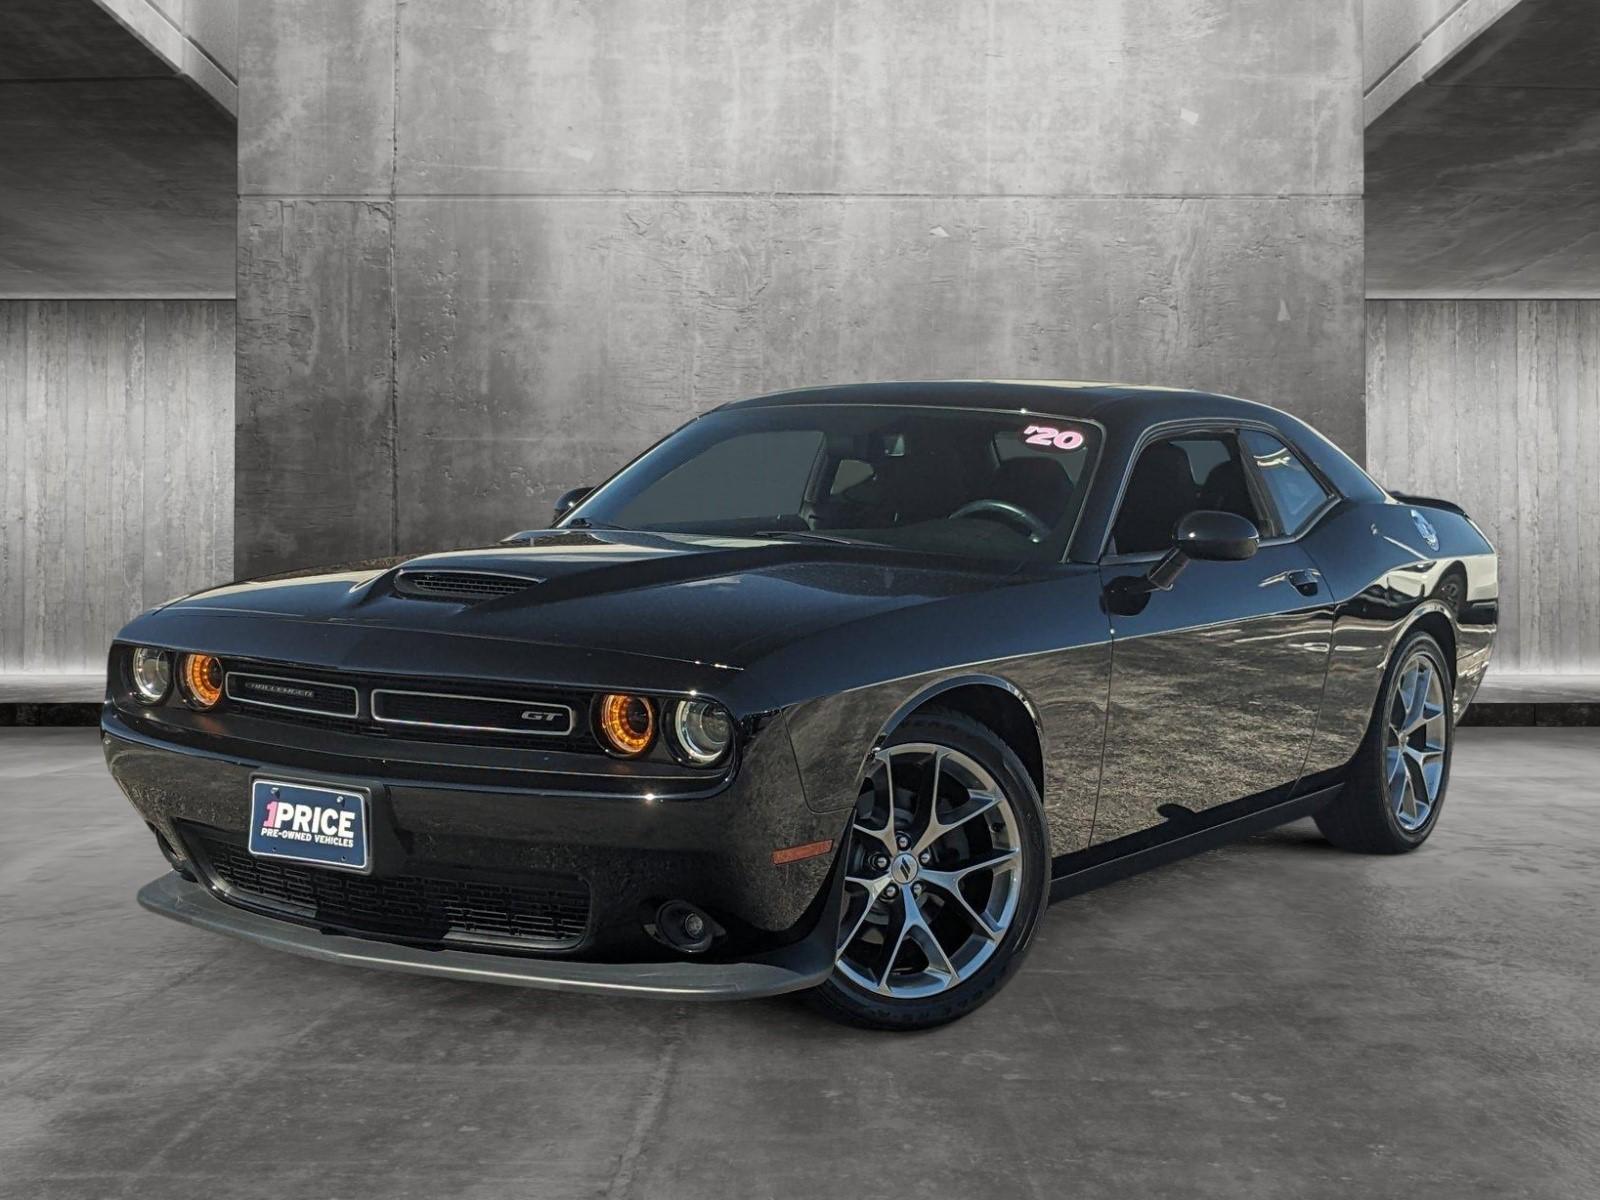 2020 Dodge Challenger Vehicle Photo in Towson, MD 21204